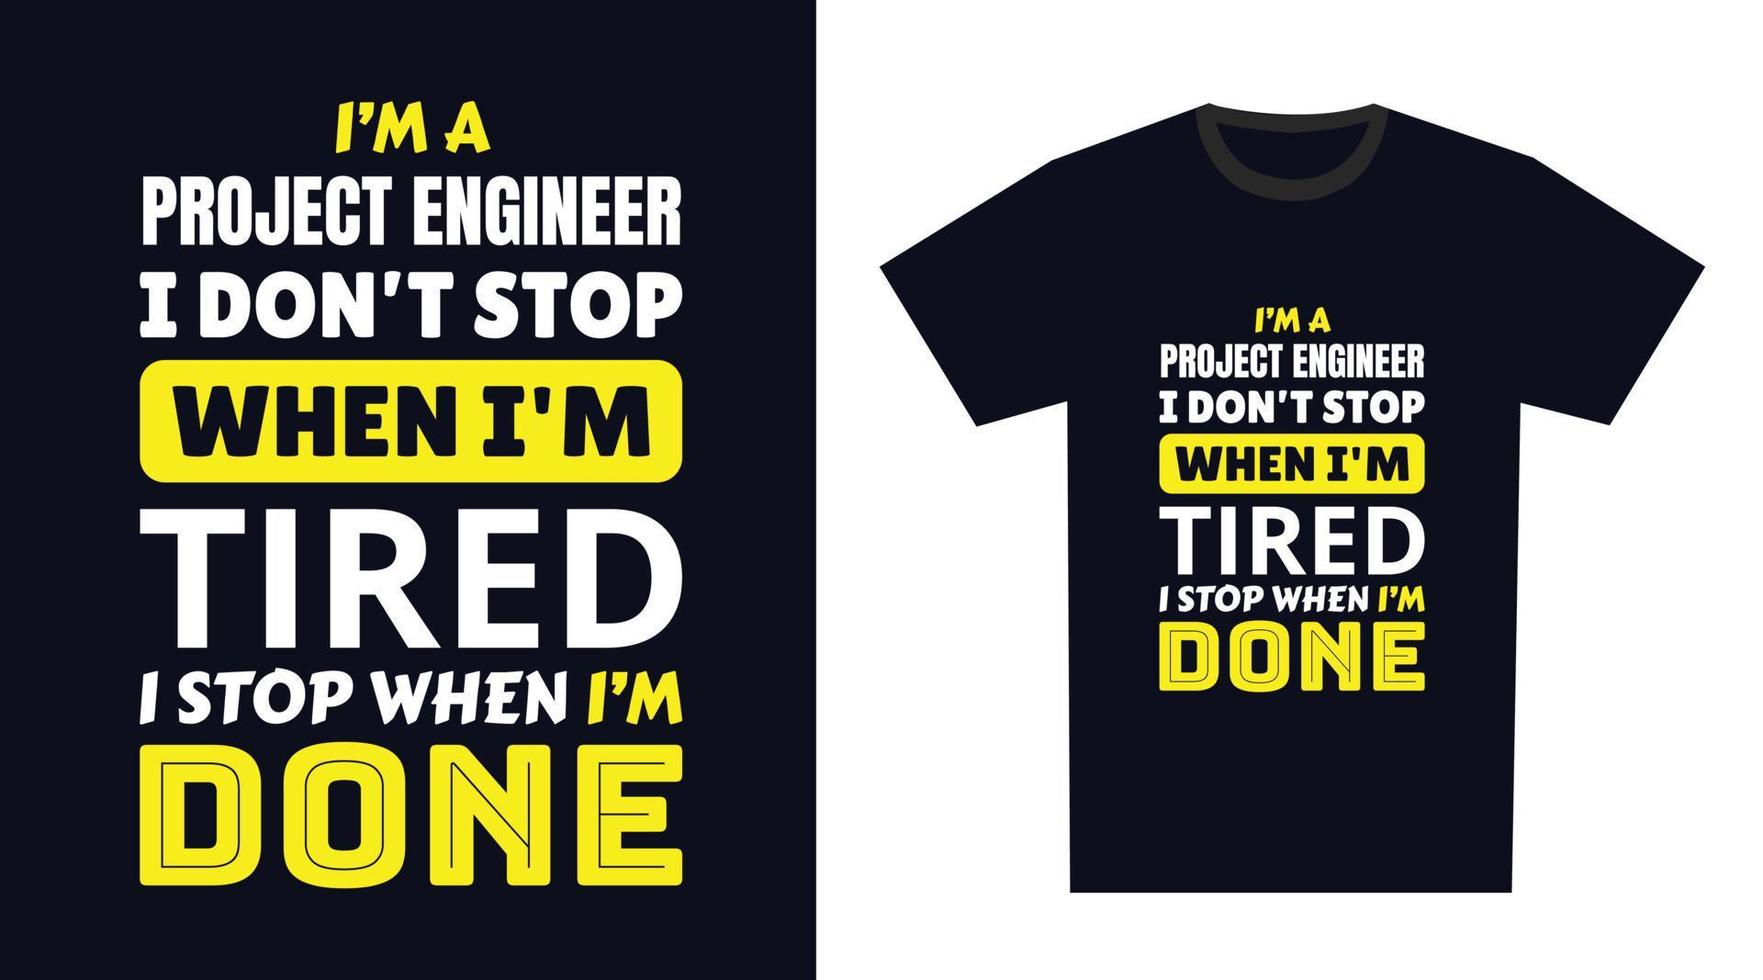 Project Engineer T Shirt Design. I 'm a Project Engineer I Don't Stop When I'm Tired, I Stop When I'm Done vector